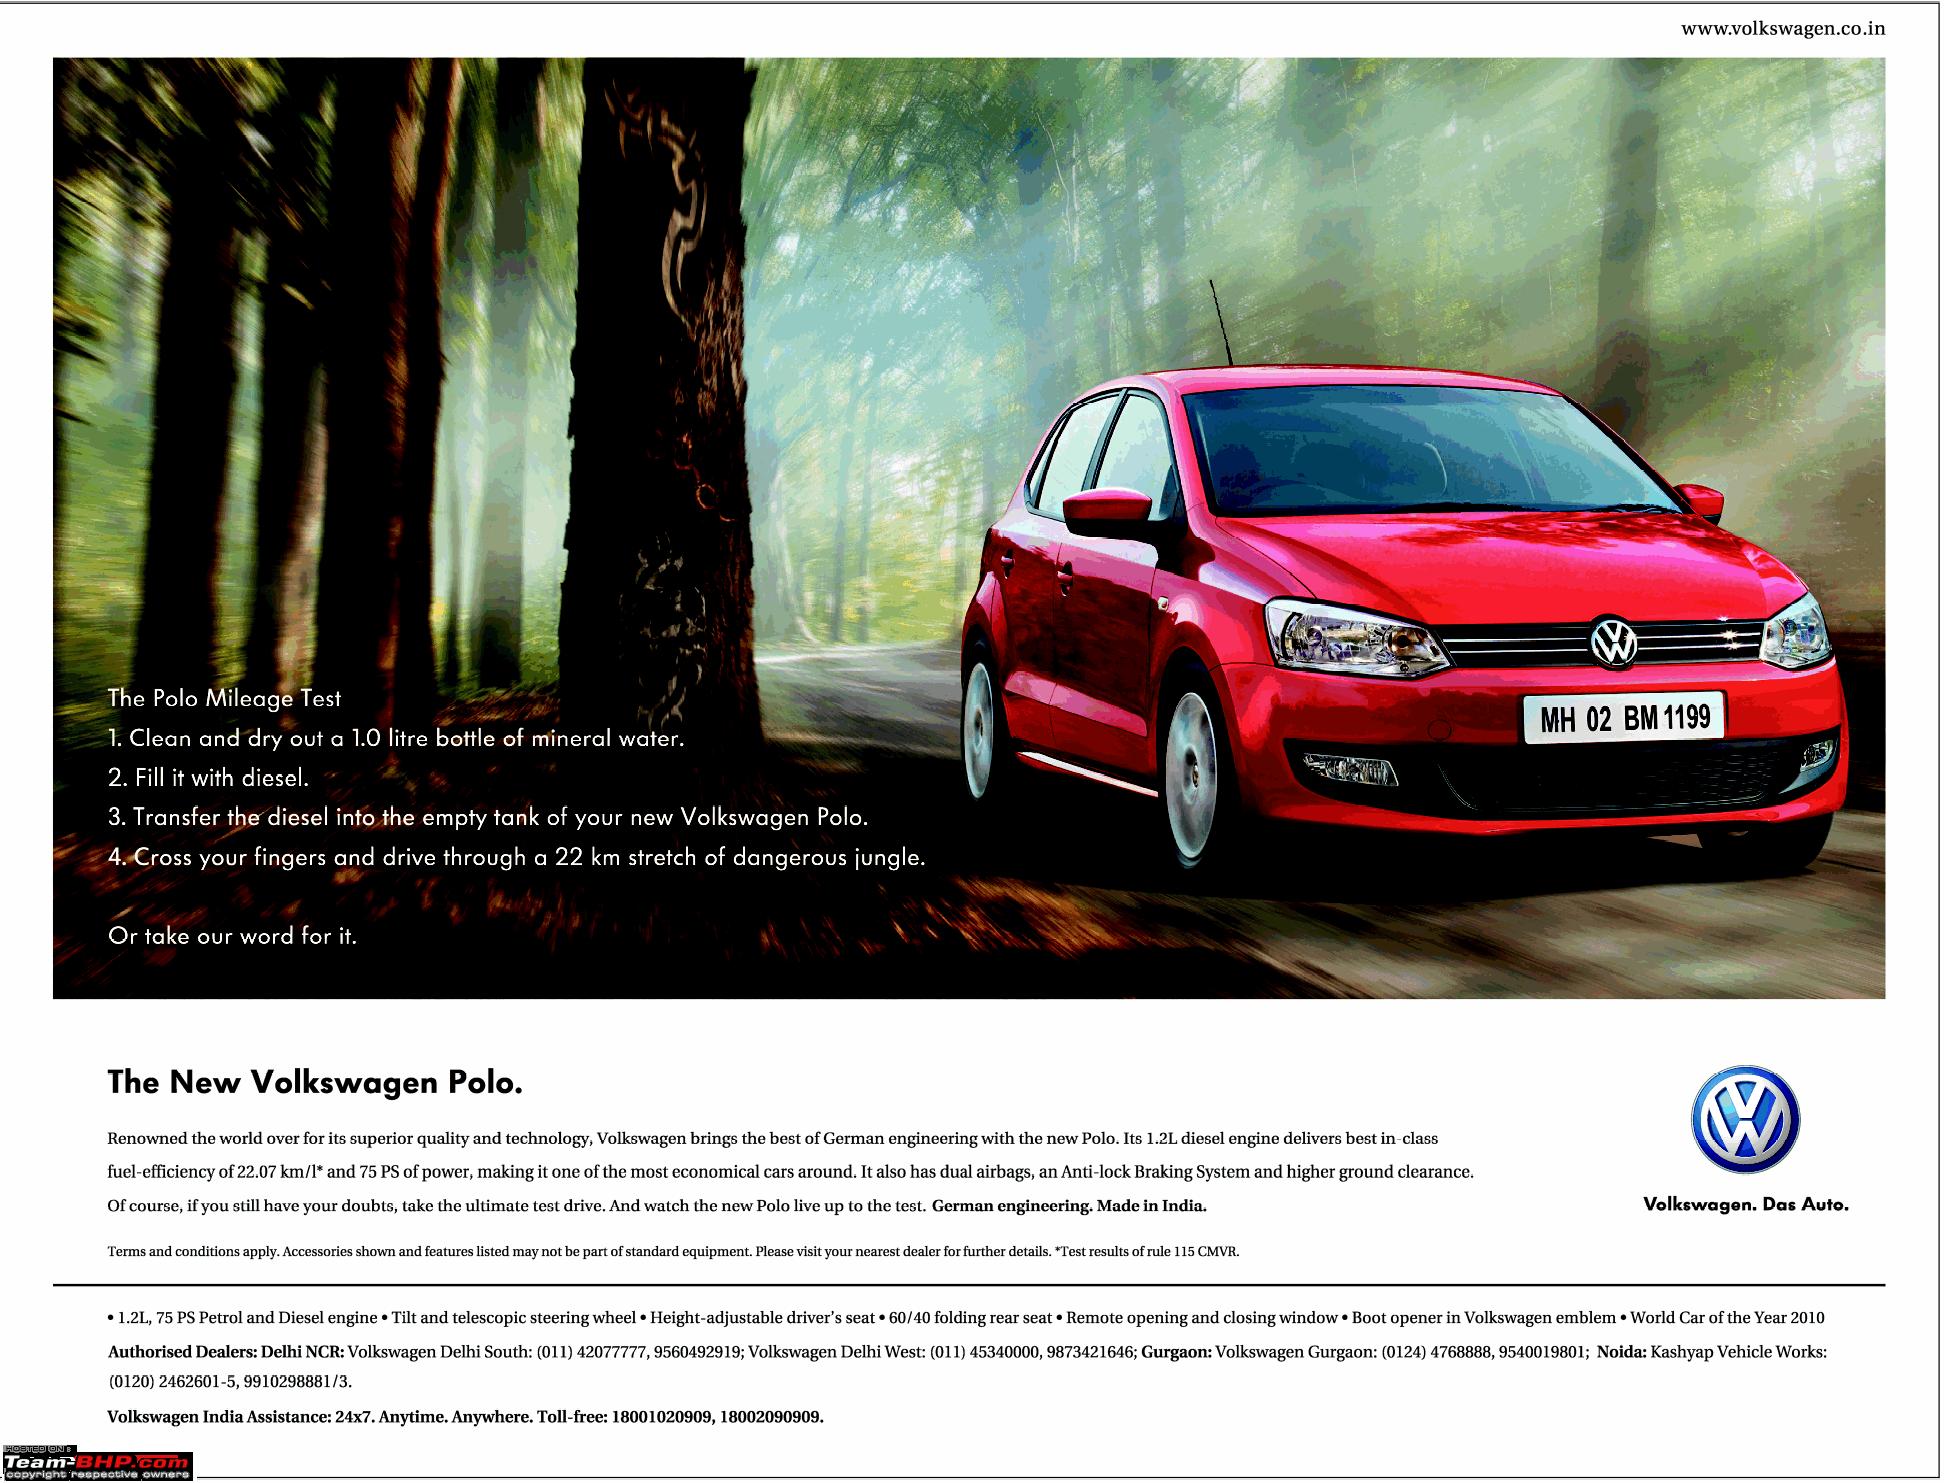 Volkswagen Polo : Test Drive & Review - Page 75 - Team-BHP